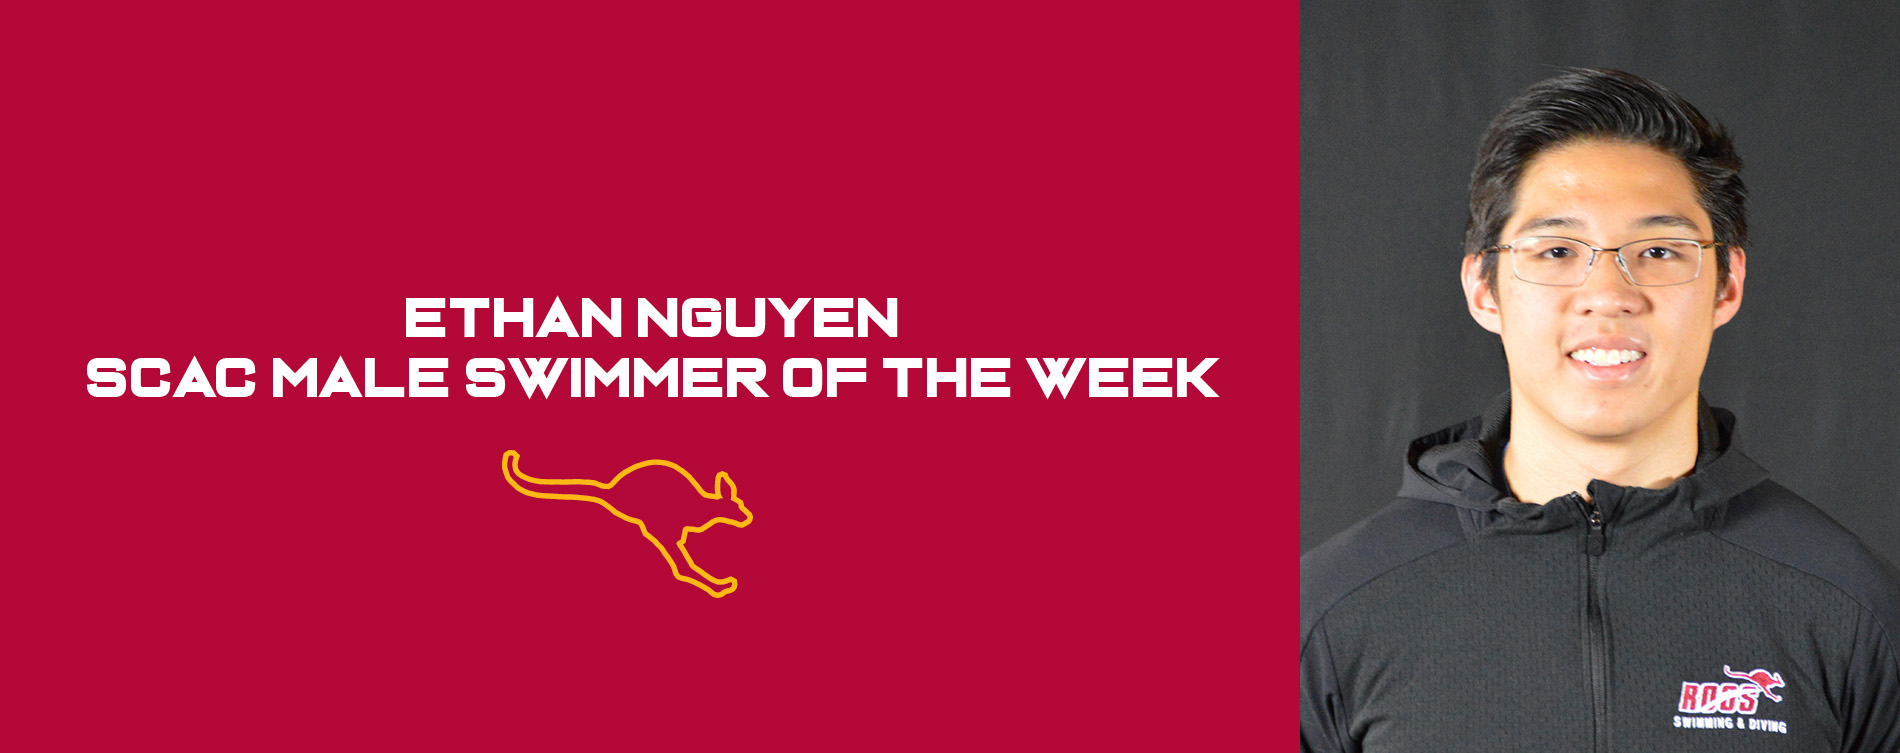 Nguyen Named SCAC Swimmer of the Week